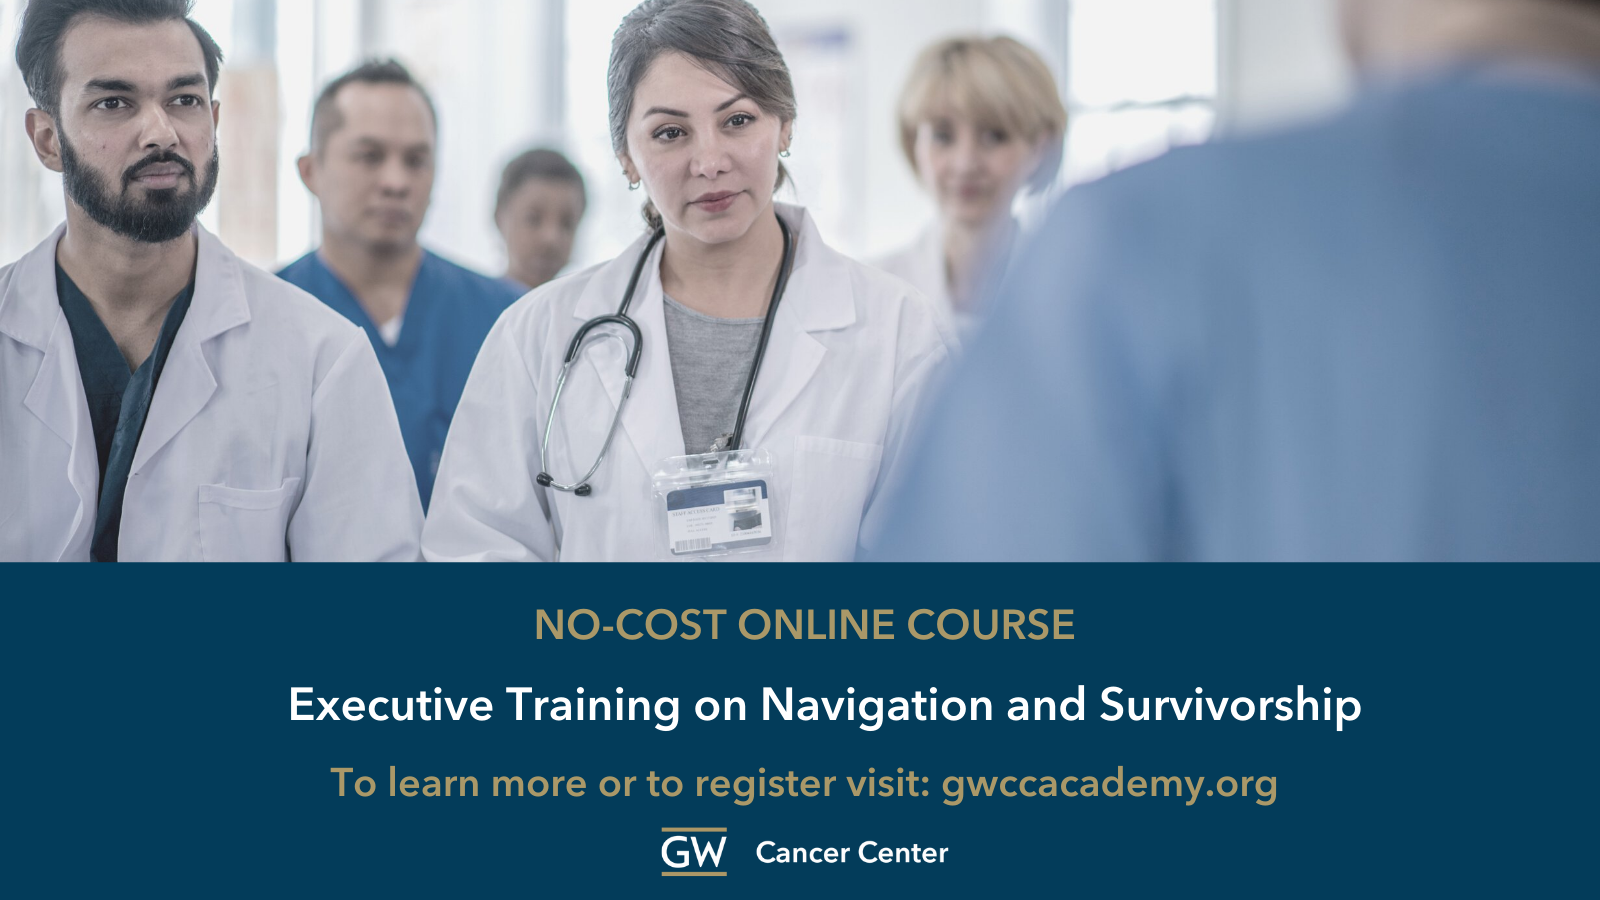 Image of clinicians participating in a briefing. Text below reads Executive Training on Navigation and Survivorship